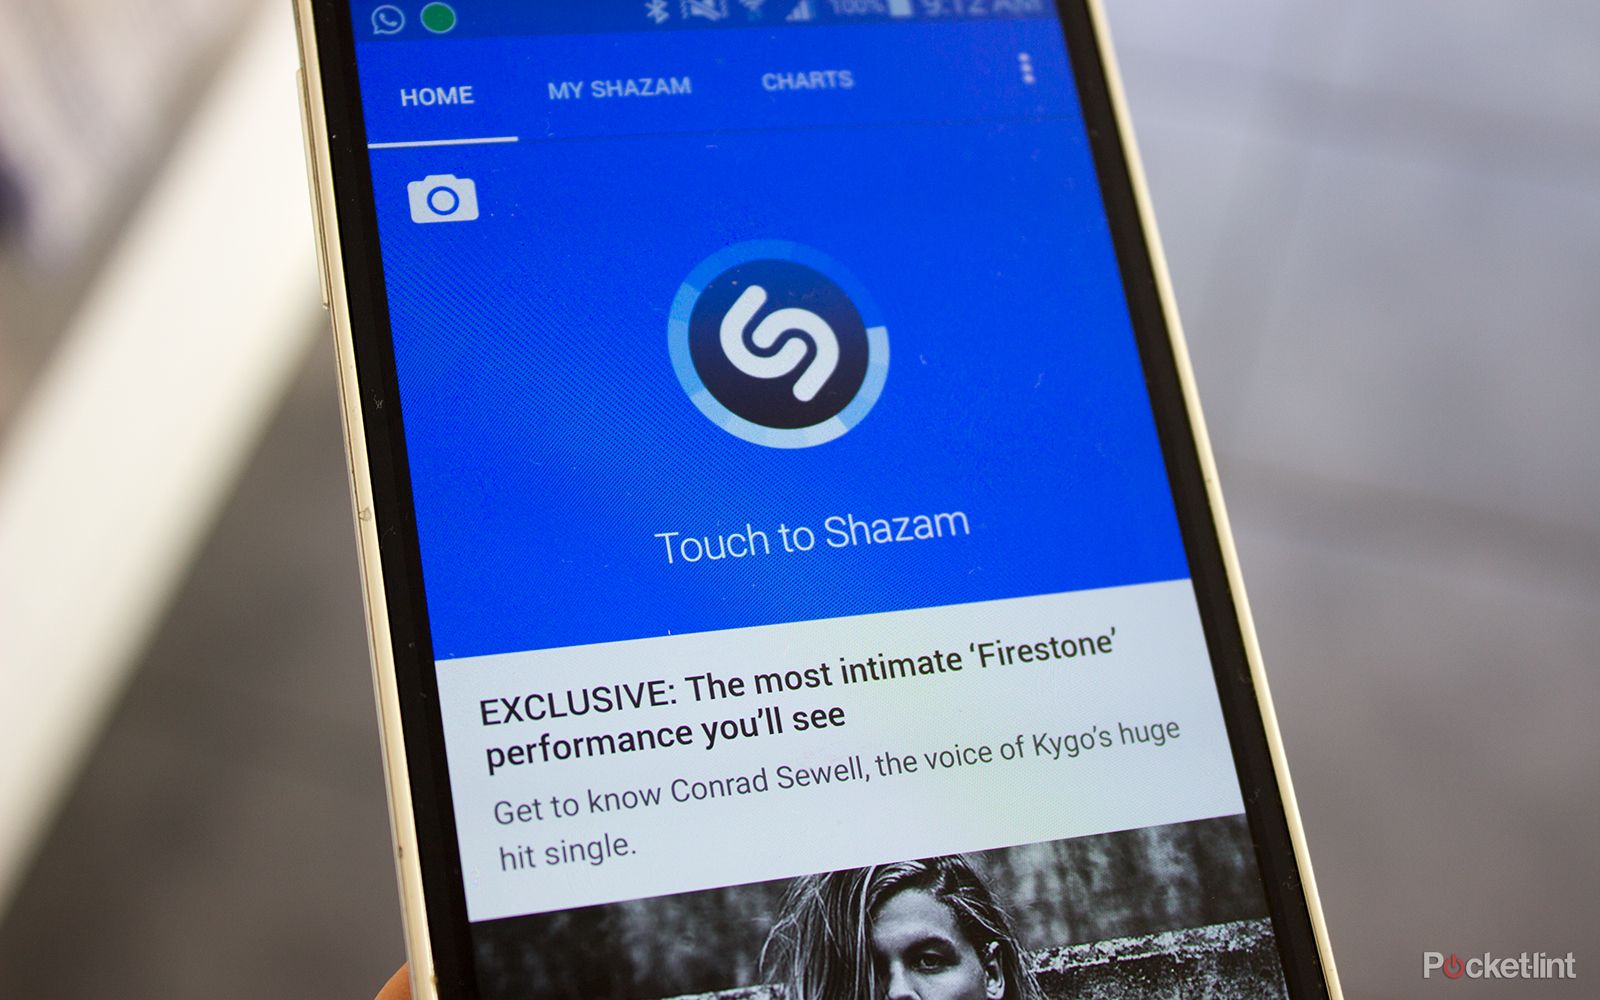 now you can see the songs musicians are tagging using shazam image 1